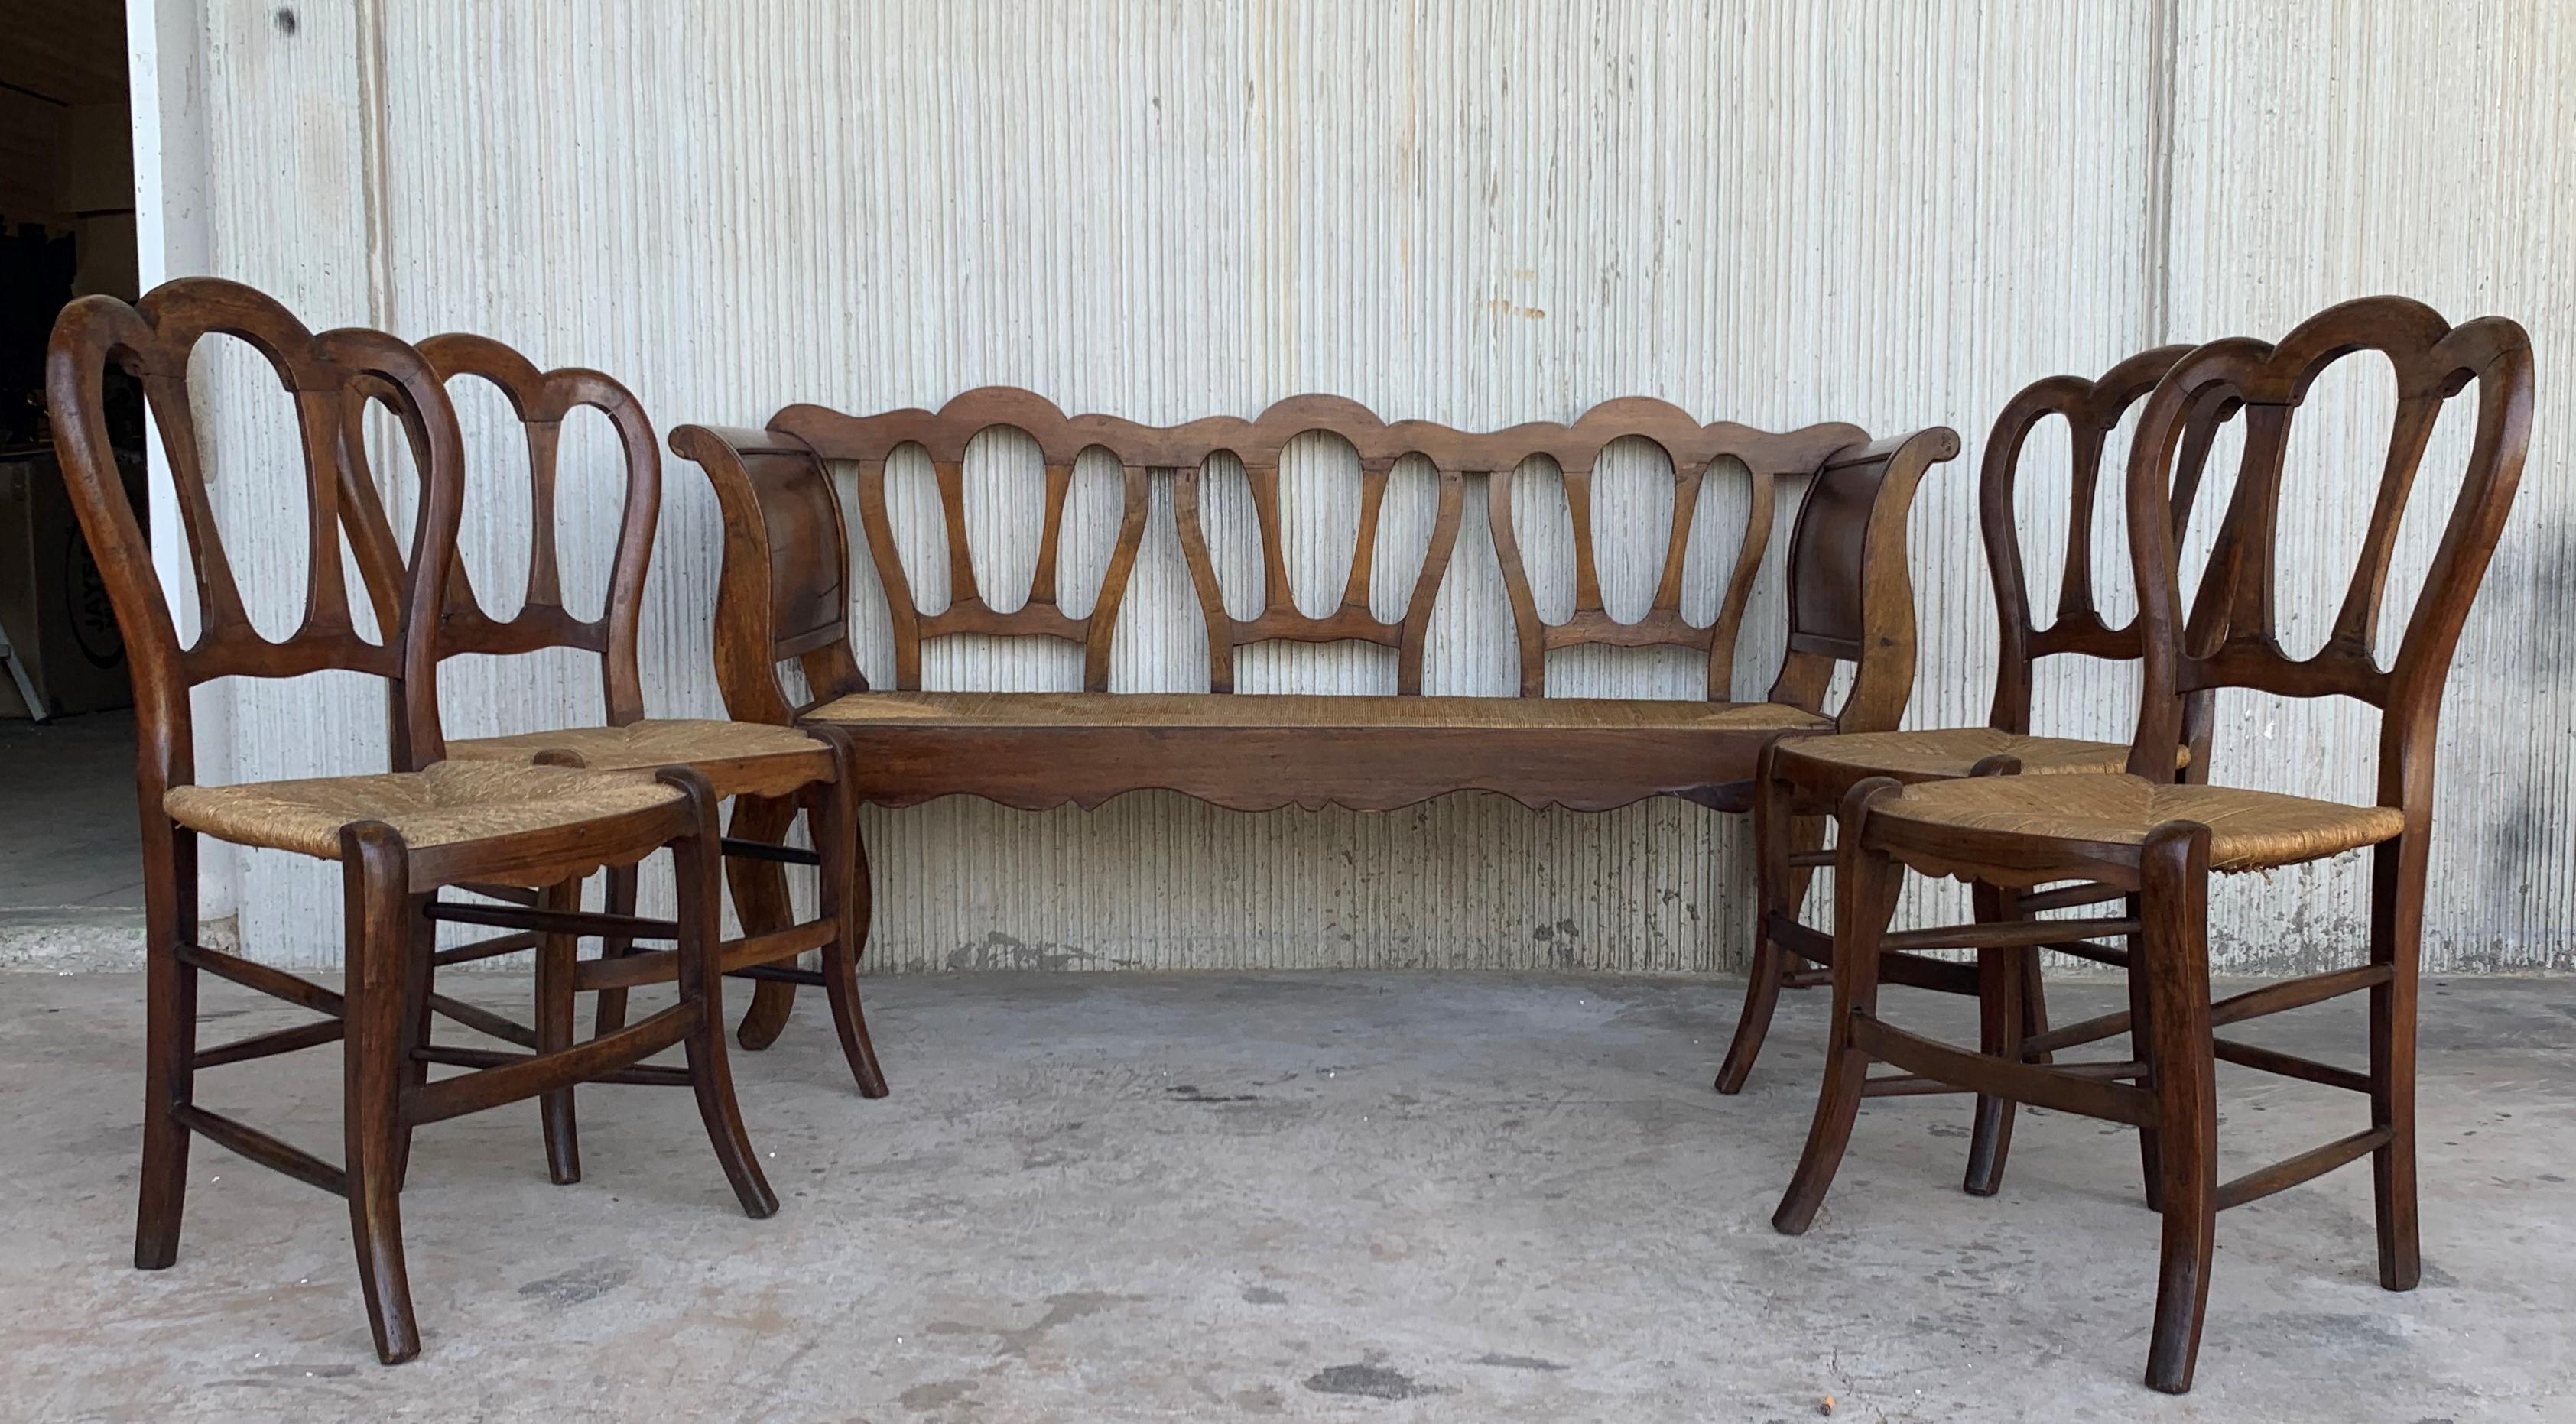 20th Century Walnut Victorian Bench in Wood and Rattan Seat In Good Condition For Sale In Miami, FL